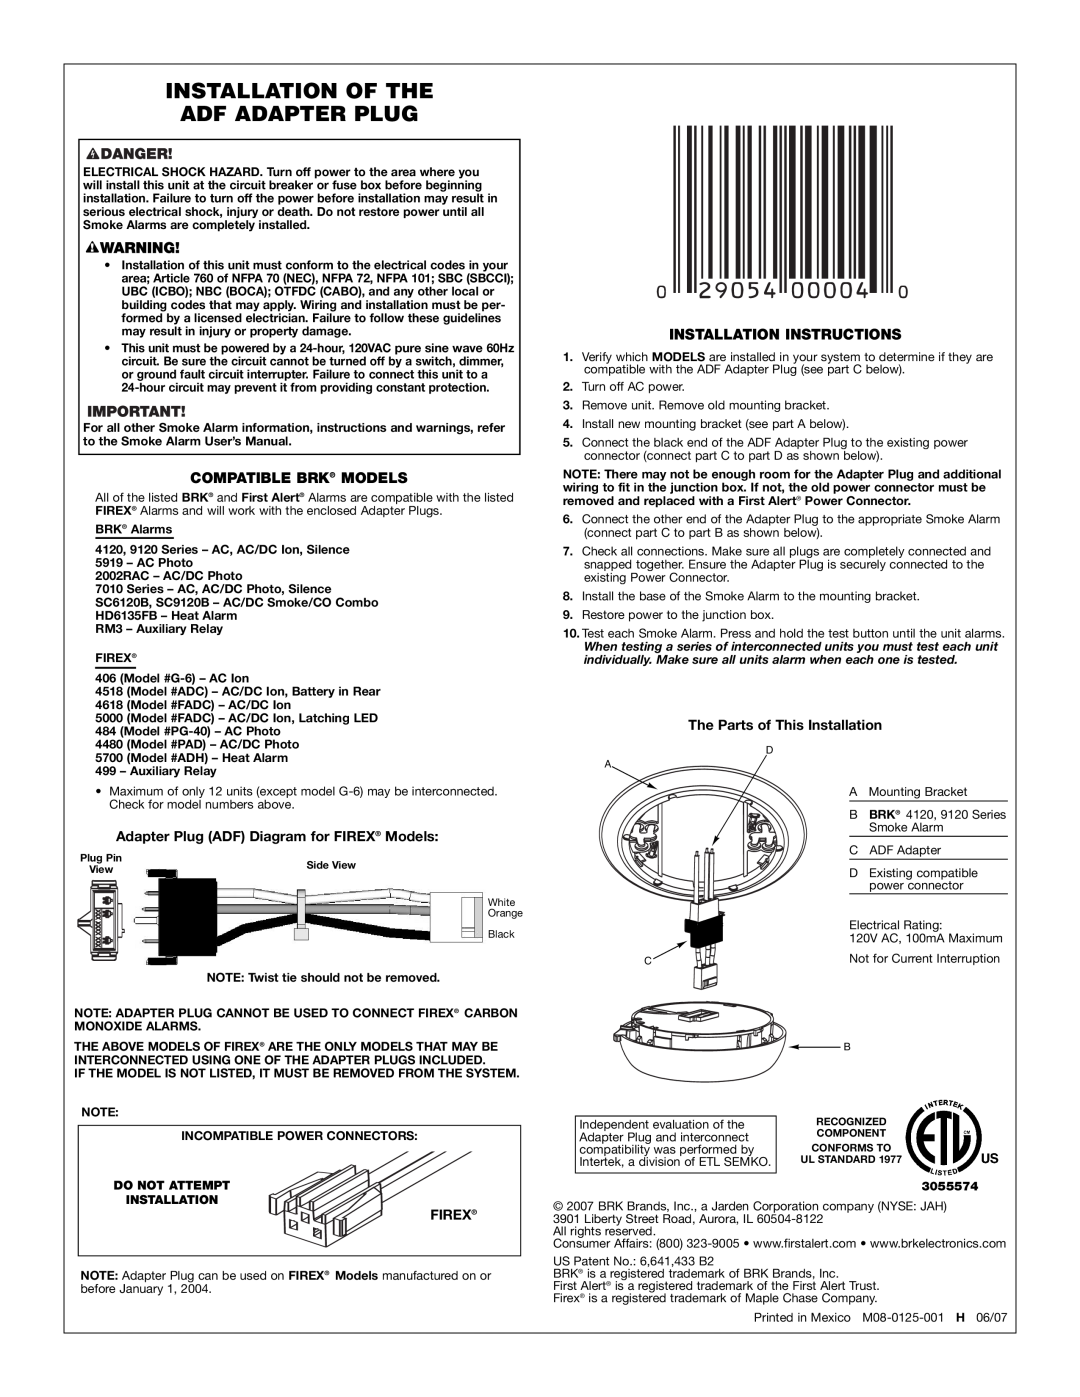 BRK electronic ADF Adapter installation instructions Installation Of The Adf Adapter Plug, Compatible Brk Models, Firex 